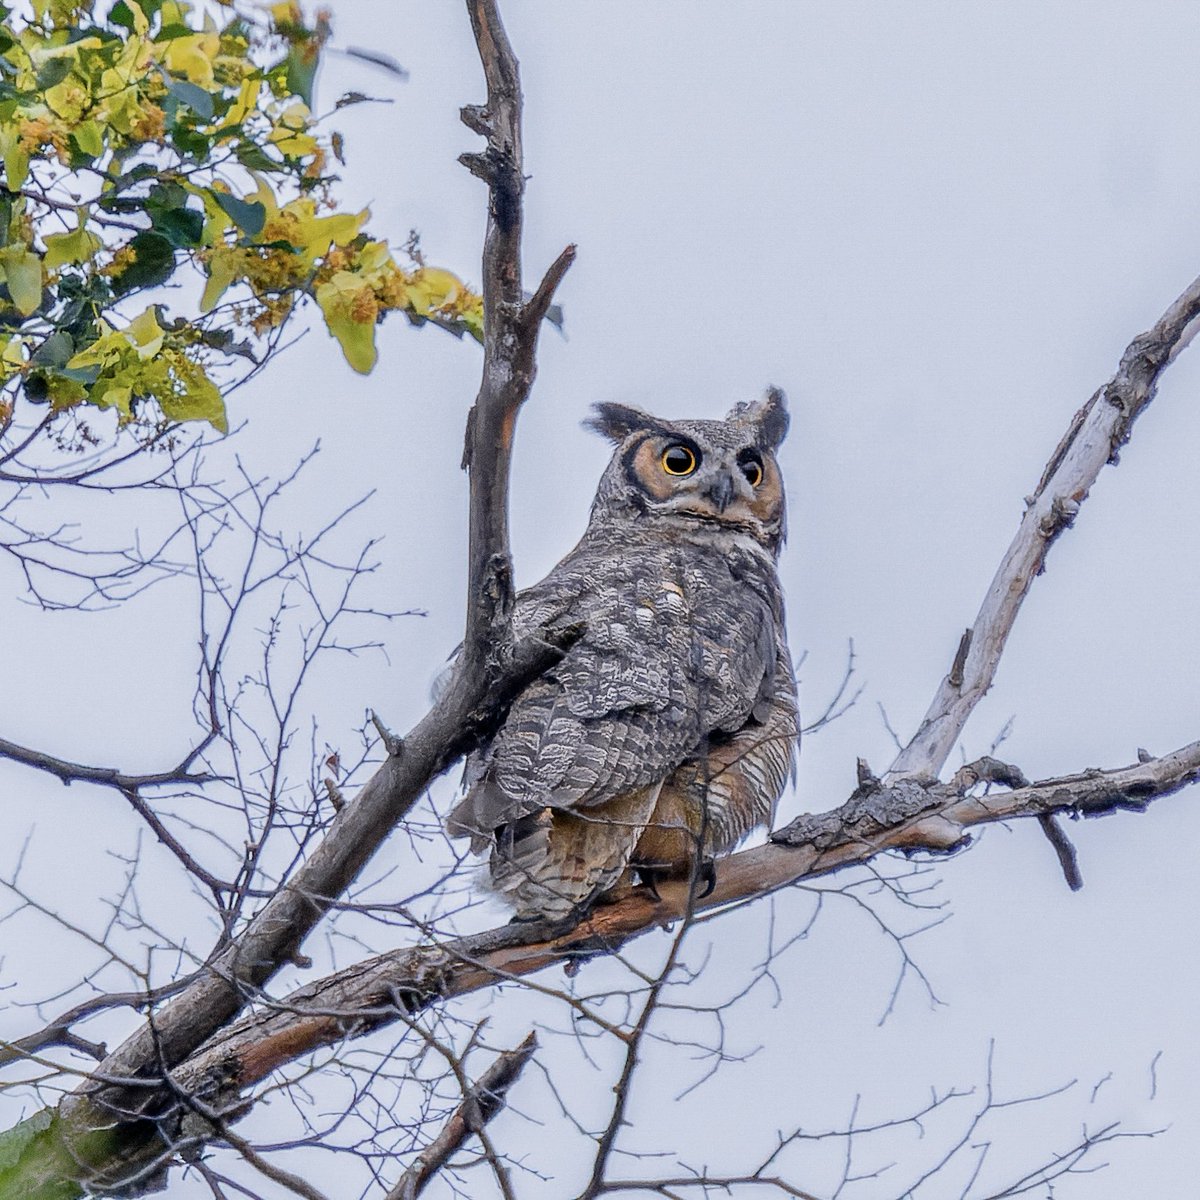 Geraldine, the resident Great Horned Owl in Central Park, at dusk on the Summer Solstice.☀️💕🦉

#birdcpp #birds #birdwatching #nature #wildlife